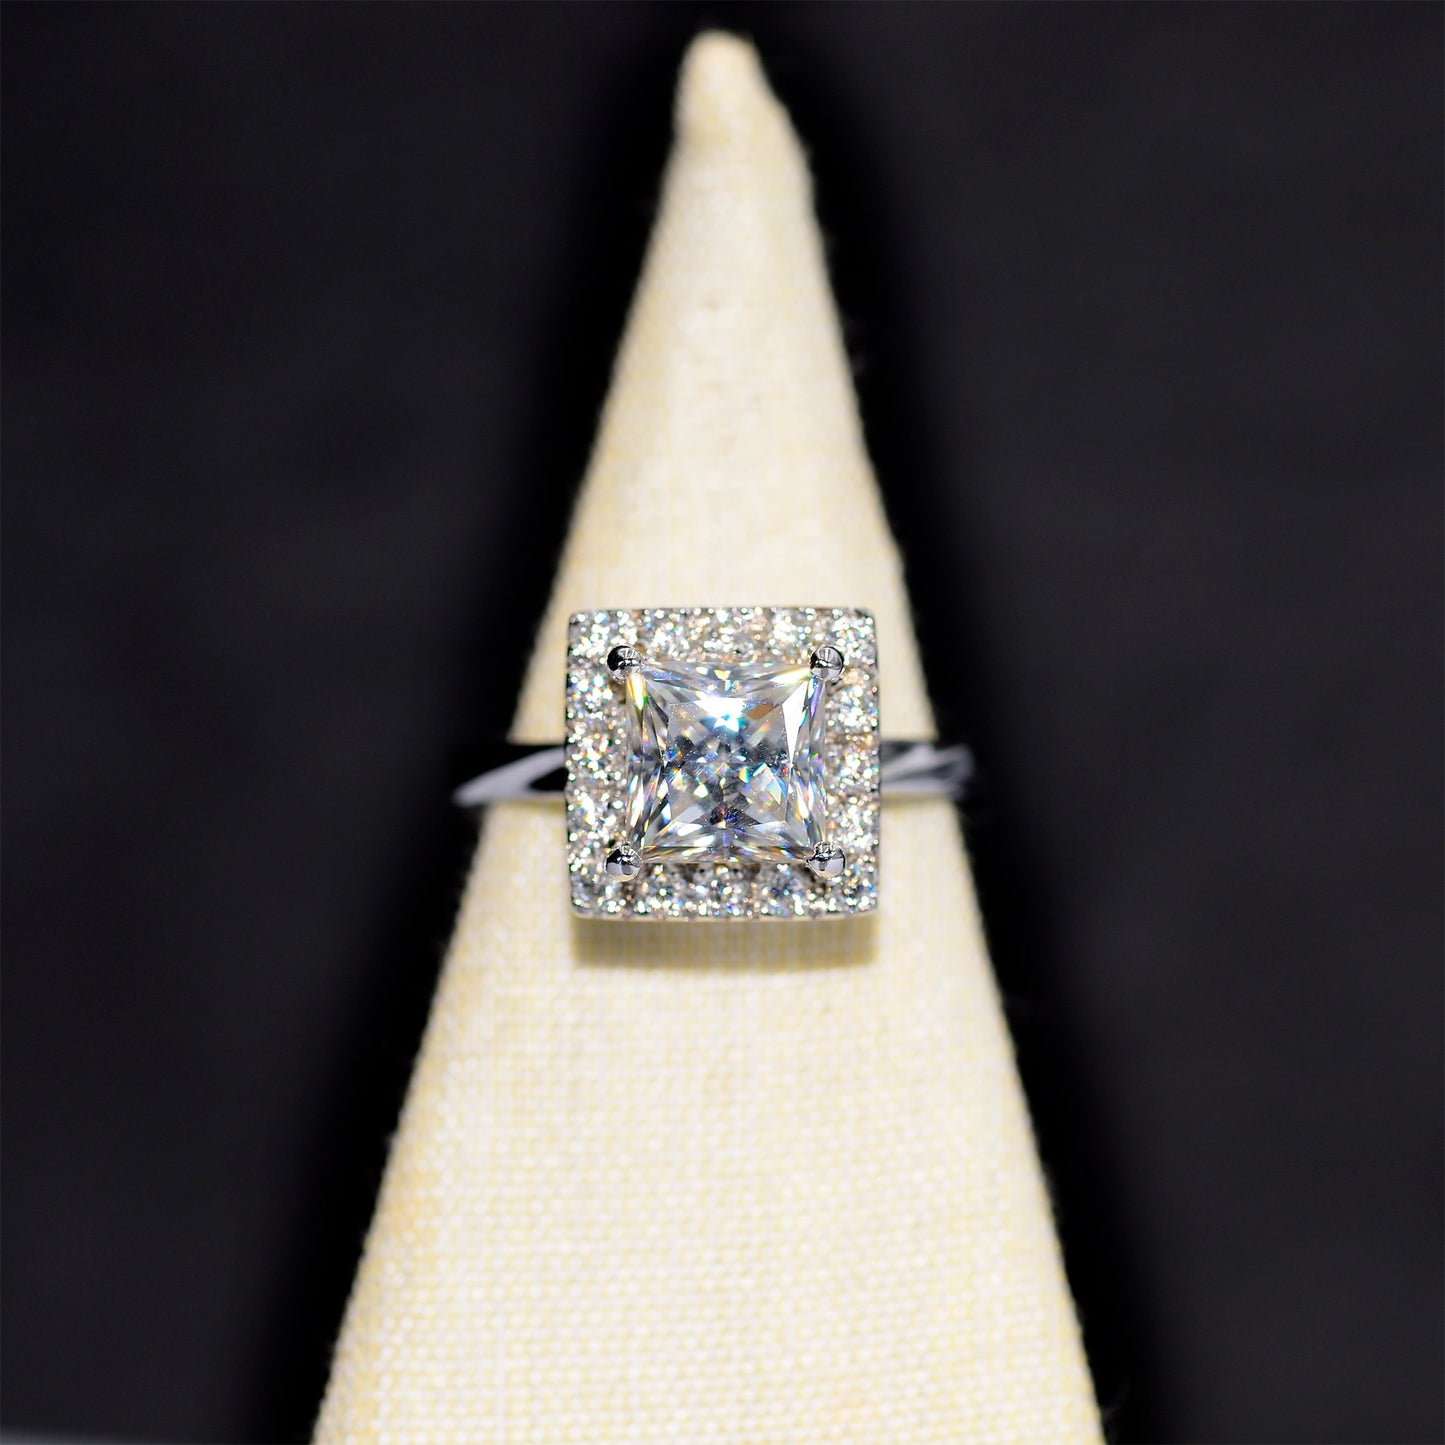 A handmade engagement ring with moissanite